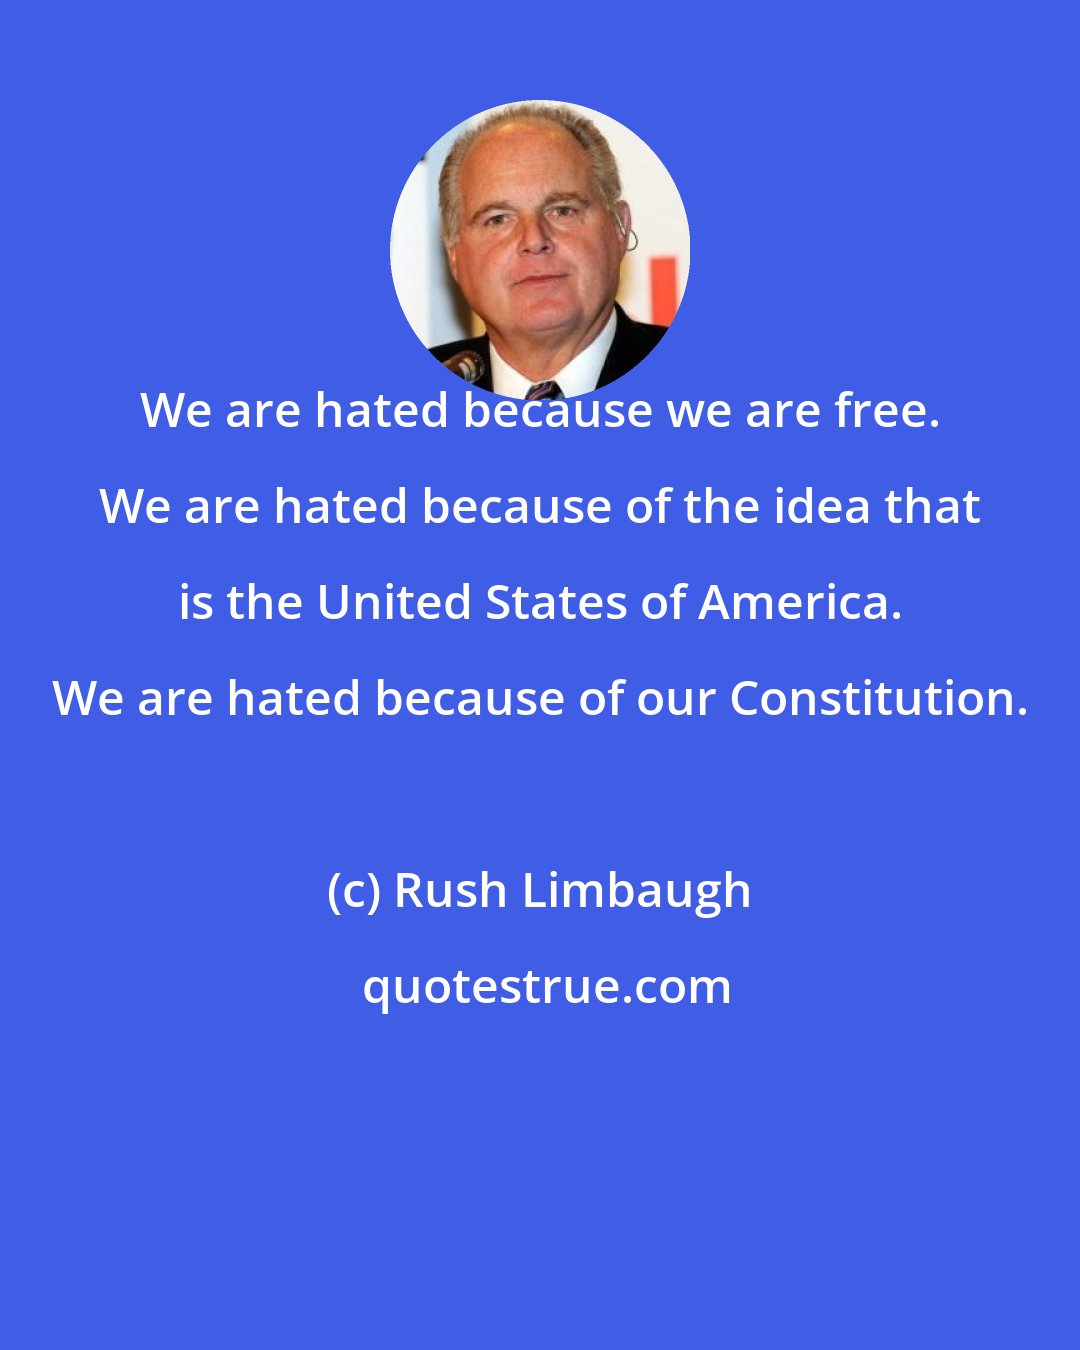 Rush Limbaugh: We are hated because we are free. We are hated because of the idea that is the United States of America. We are hated because of our Constitution.